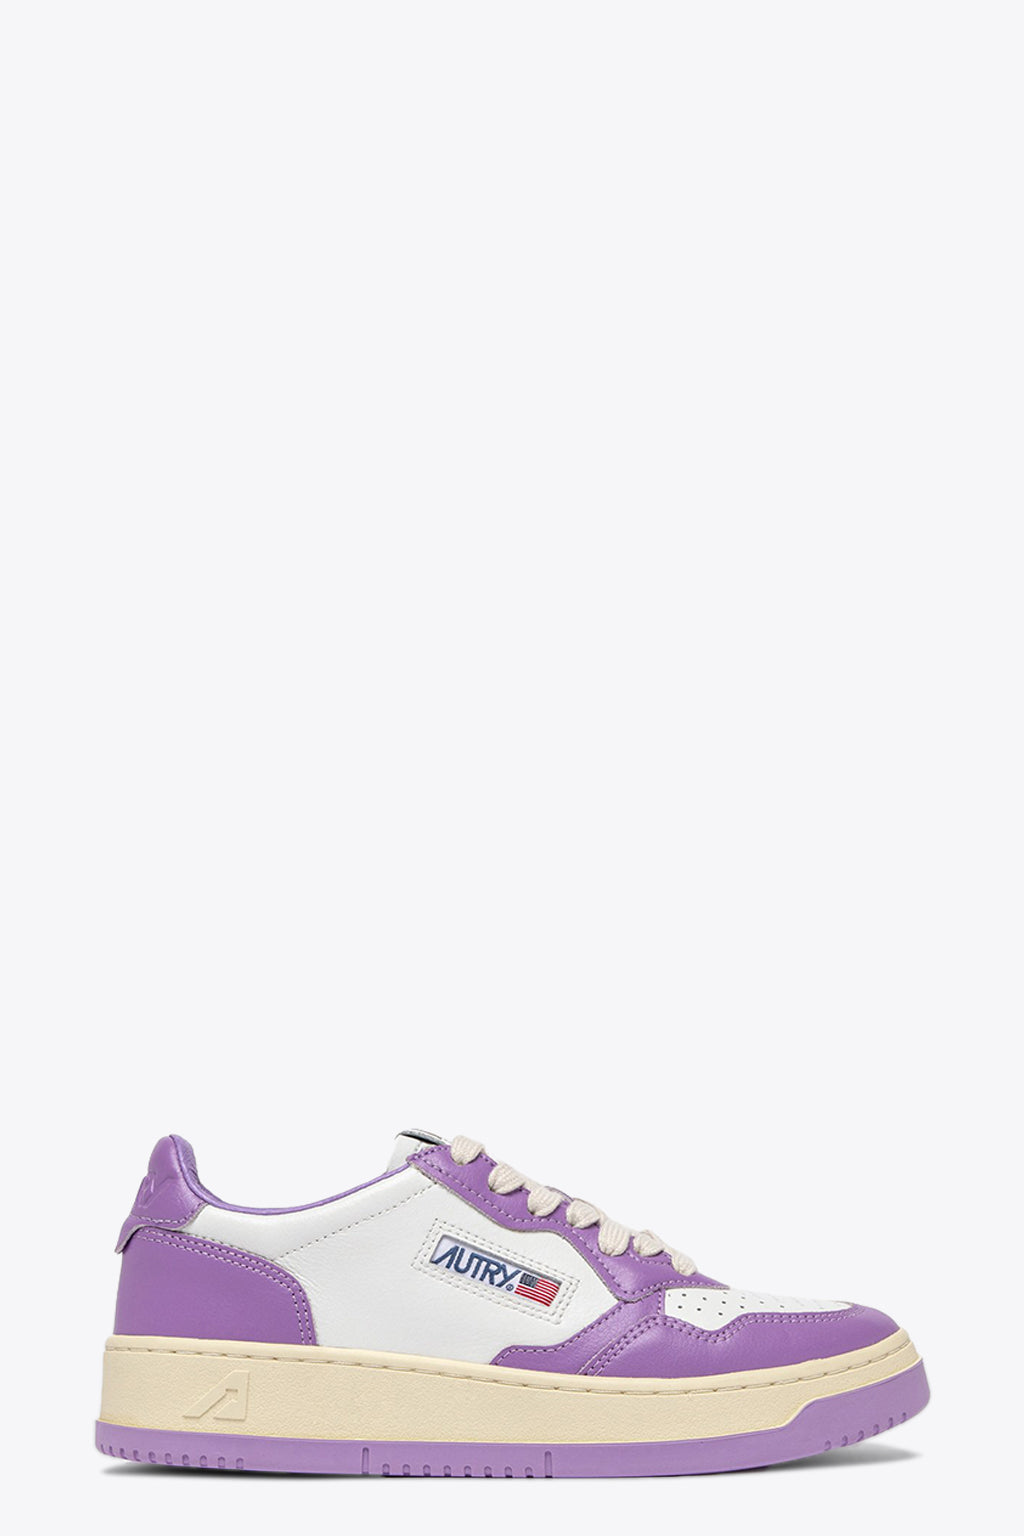 alt-image__Purple-and-white-leather-low-sneaker---Medalist